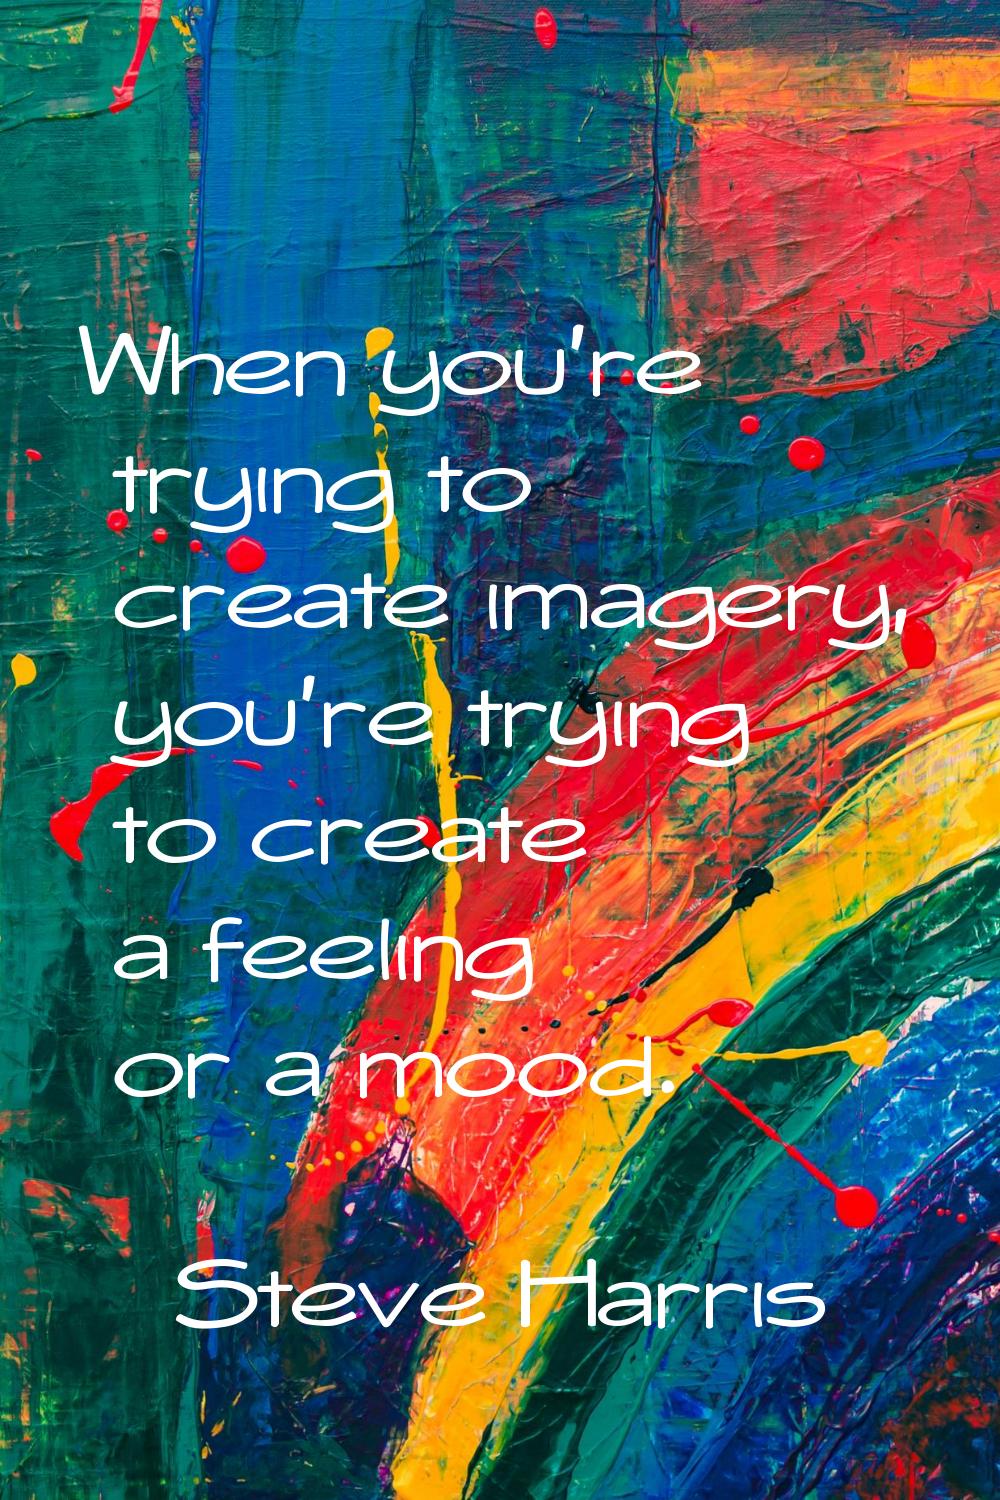 When you’re trying to create imagery, you’re trying to create a feeling or a mood.